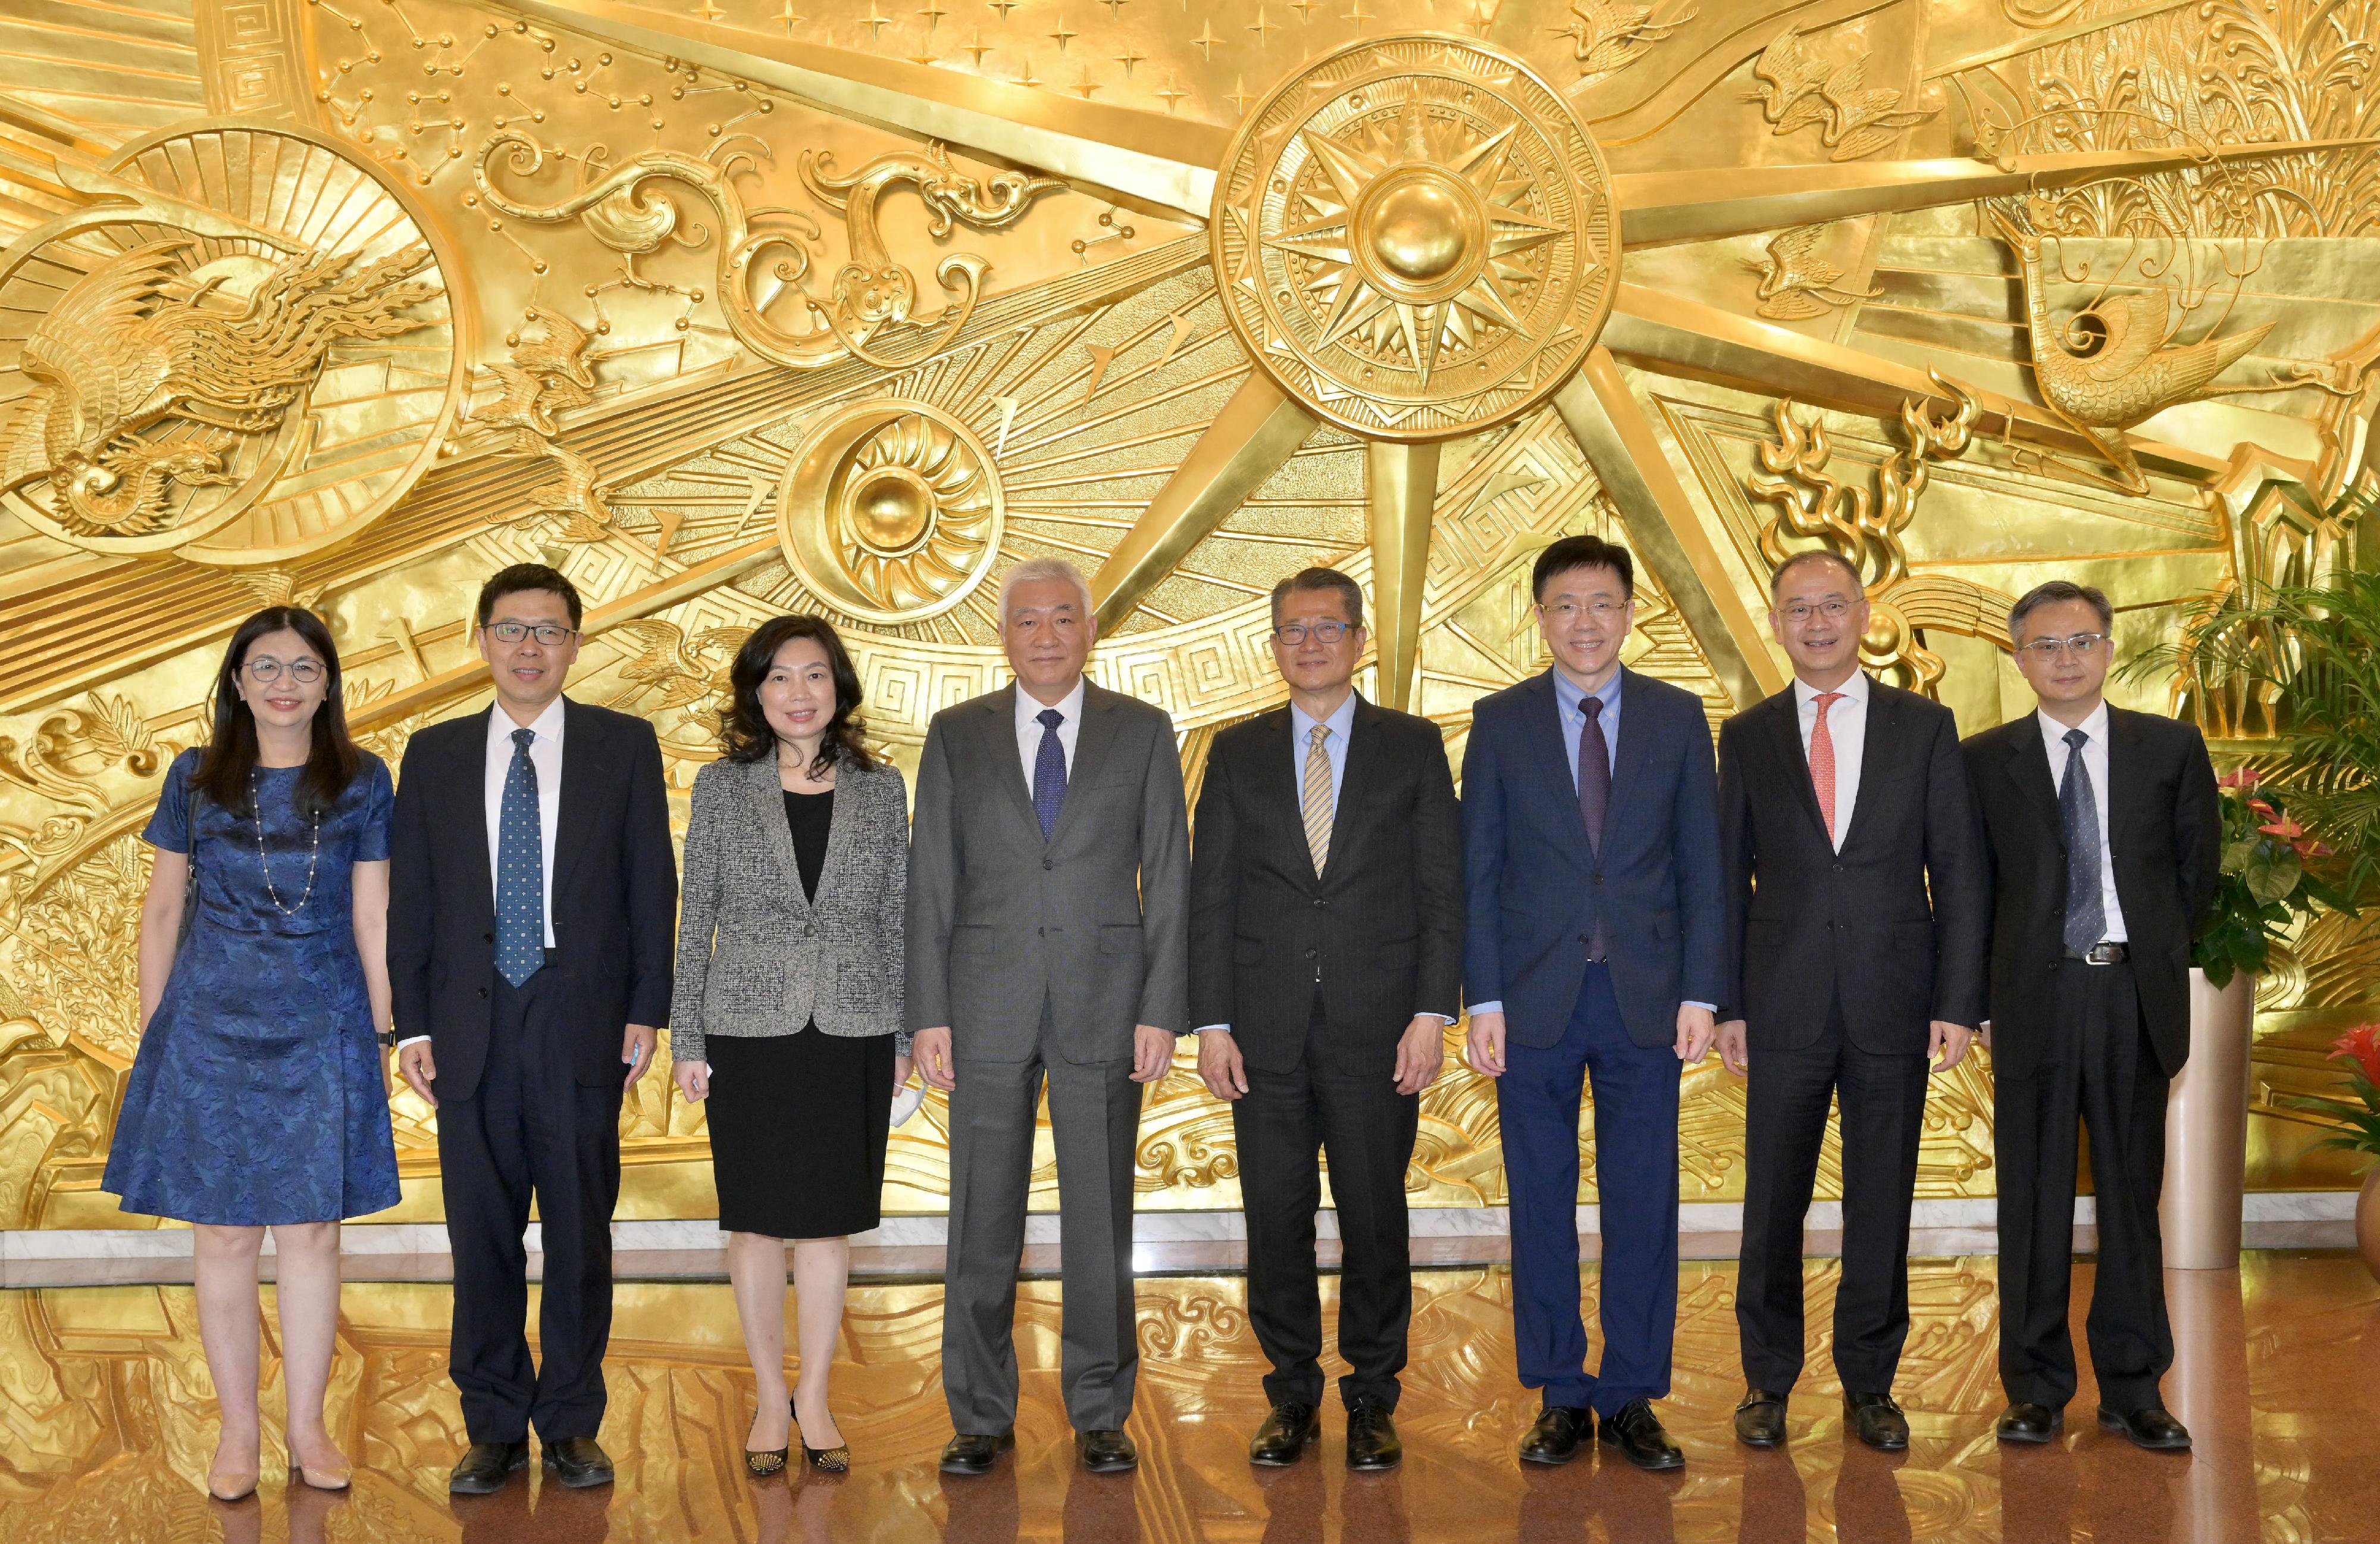 The Financial Secretary, Mr Paul Chan, continues his visit in Beijing today (April 19). Accompanied by the Secretary for Innovation, Technology and Industry, Professor Sun Dong, Mr Chan met with the Minister of Science and Technology, Mr Wang Zhigang, and exchanged views on the development of innovation and technology. Photo shows Mr Chan (fourth right); Mr Wang (fourth left); Professor Sun (third right); the Permanent Secretary for Financial Services and the Treasury (Financial Services), Ms Salina Yan (third left); the Chief Executive of the Hong Kong Monetary Authority, Mr Eddie Yue (second right); and the Chief Executive Officer of the Securities and Futures Commission, Ms Julia Leung (first left), after the meeting.